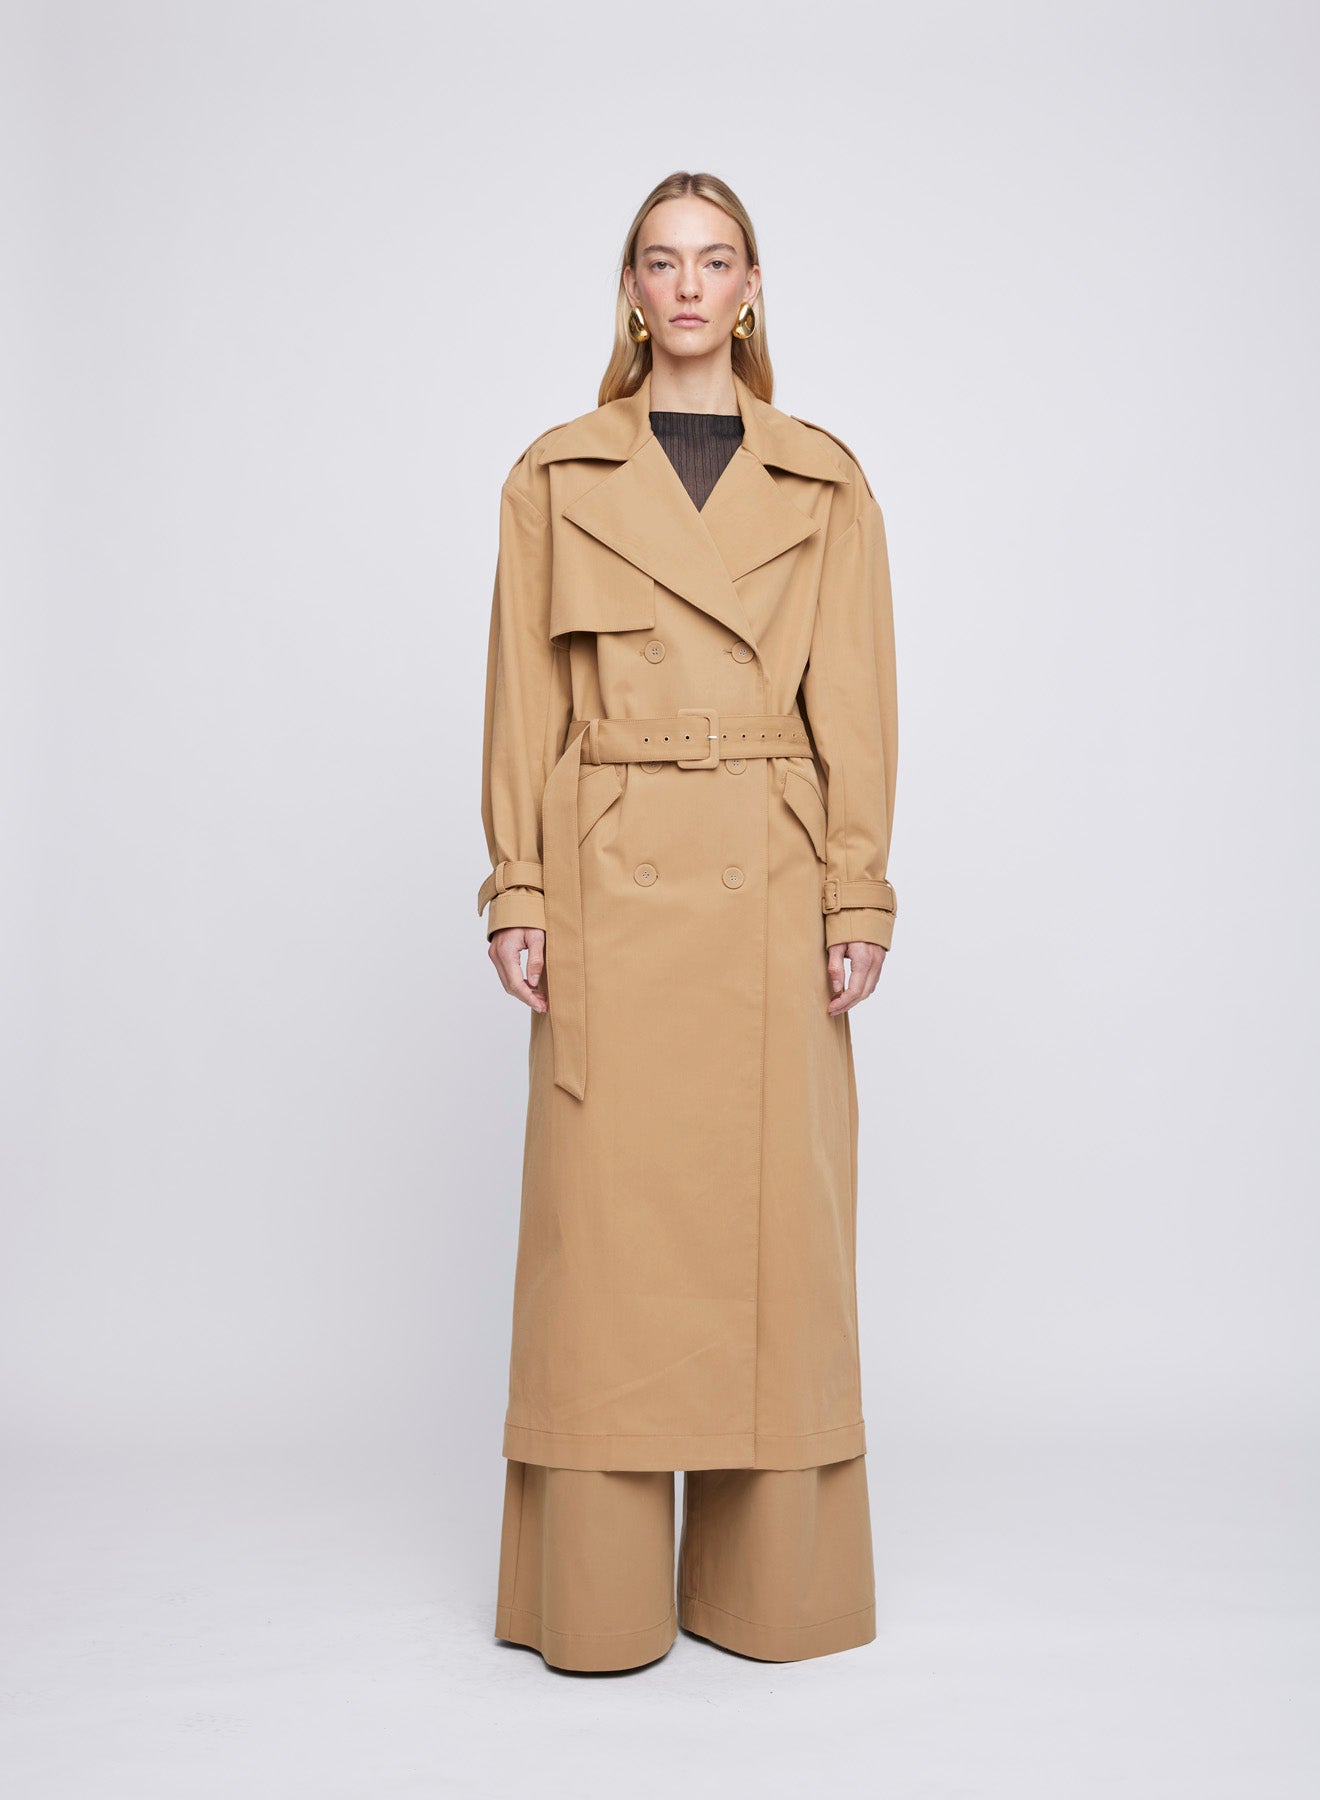 The ANNA QUAN Madden Coat in Tan is a water resistant trench with a double breasted silhouette and a removable belt.